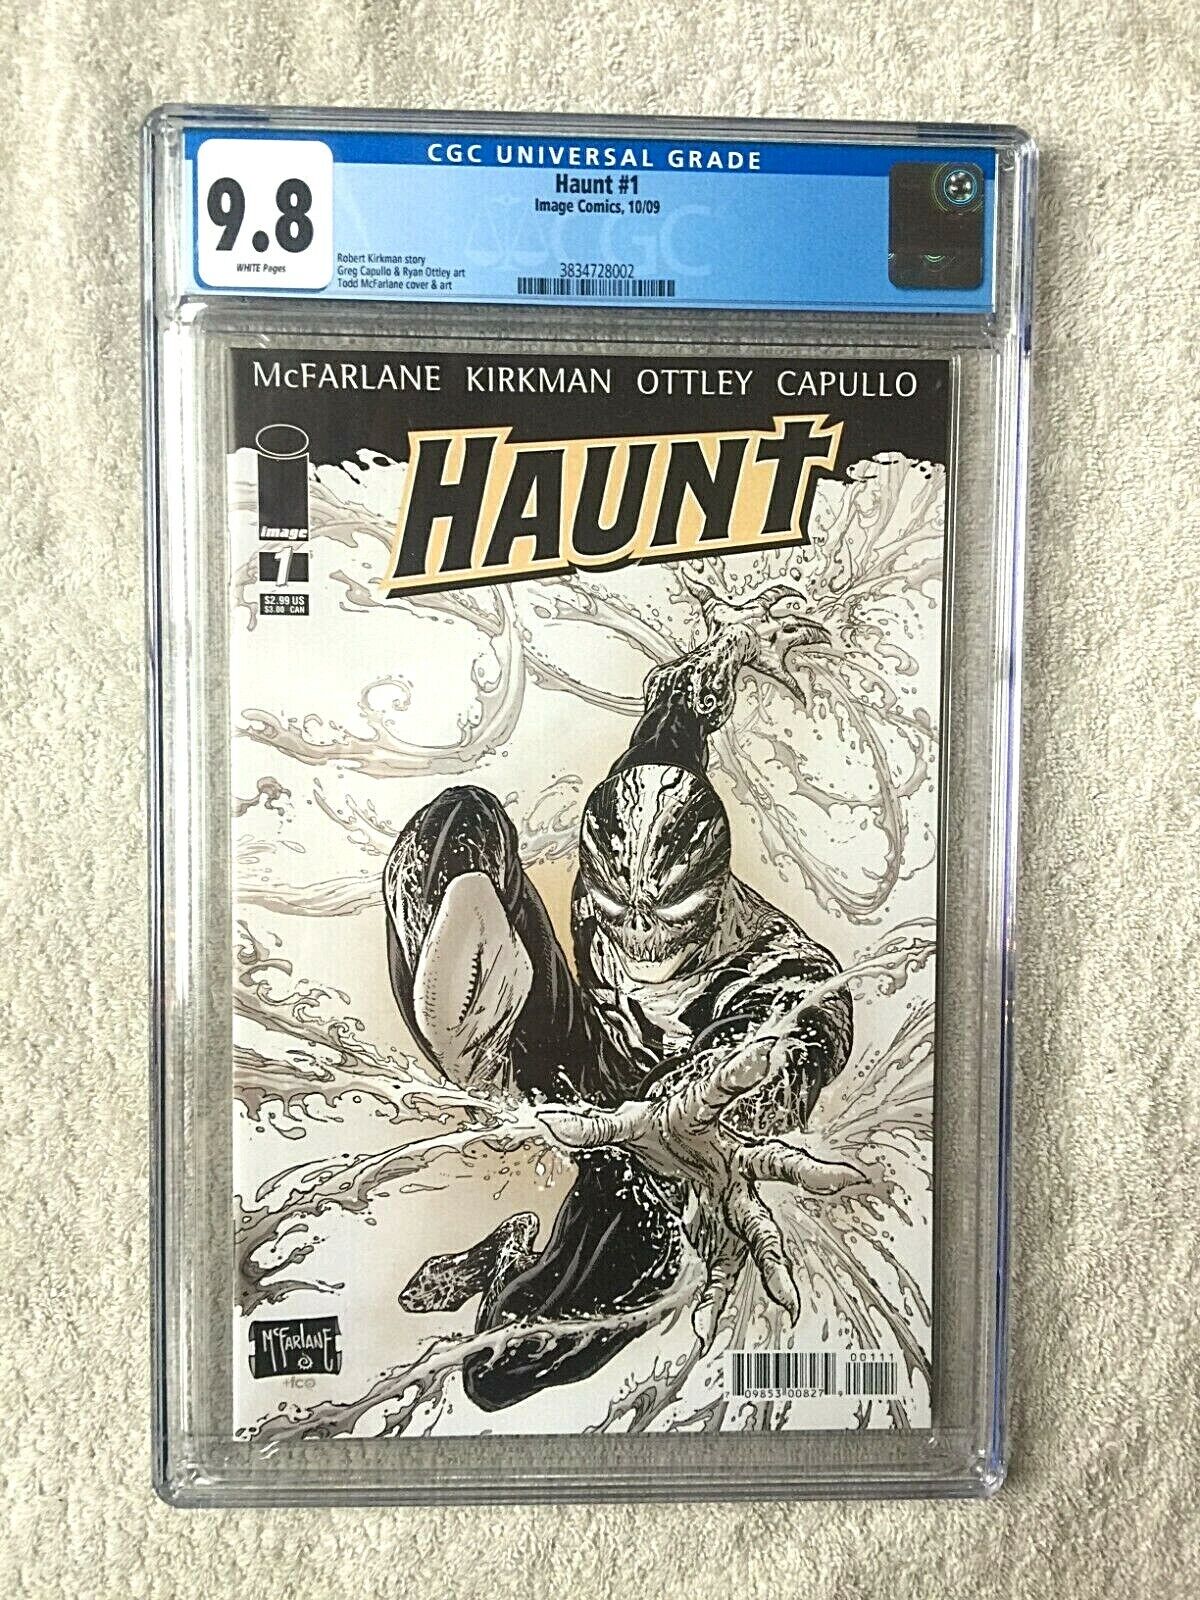 HAUNT #1 October 2009 CGC 9.8 White Pages McFarlane cover plus Free Reader Copy